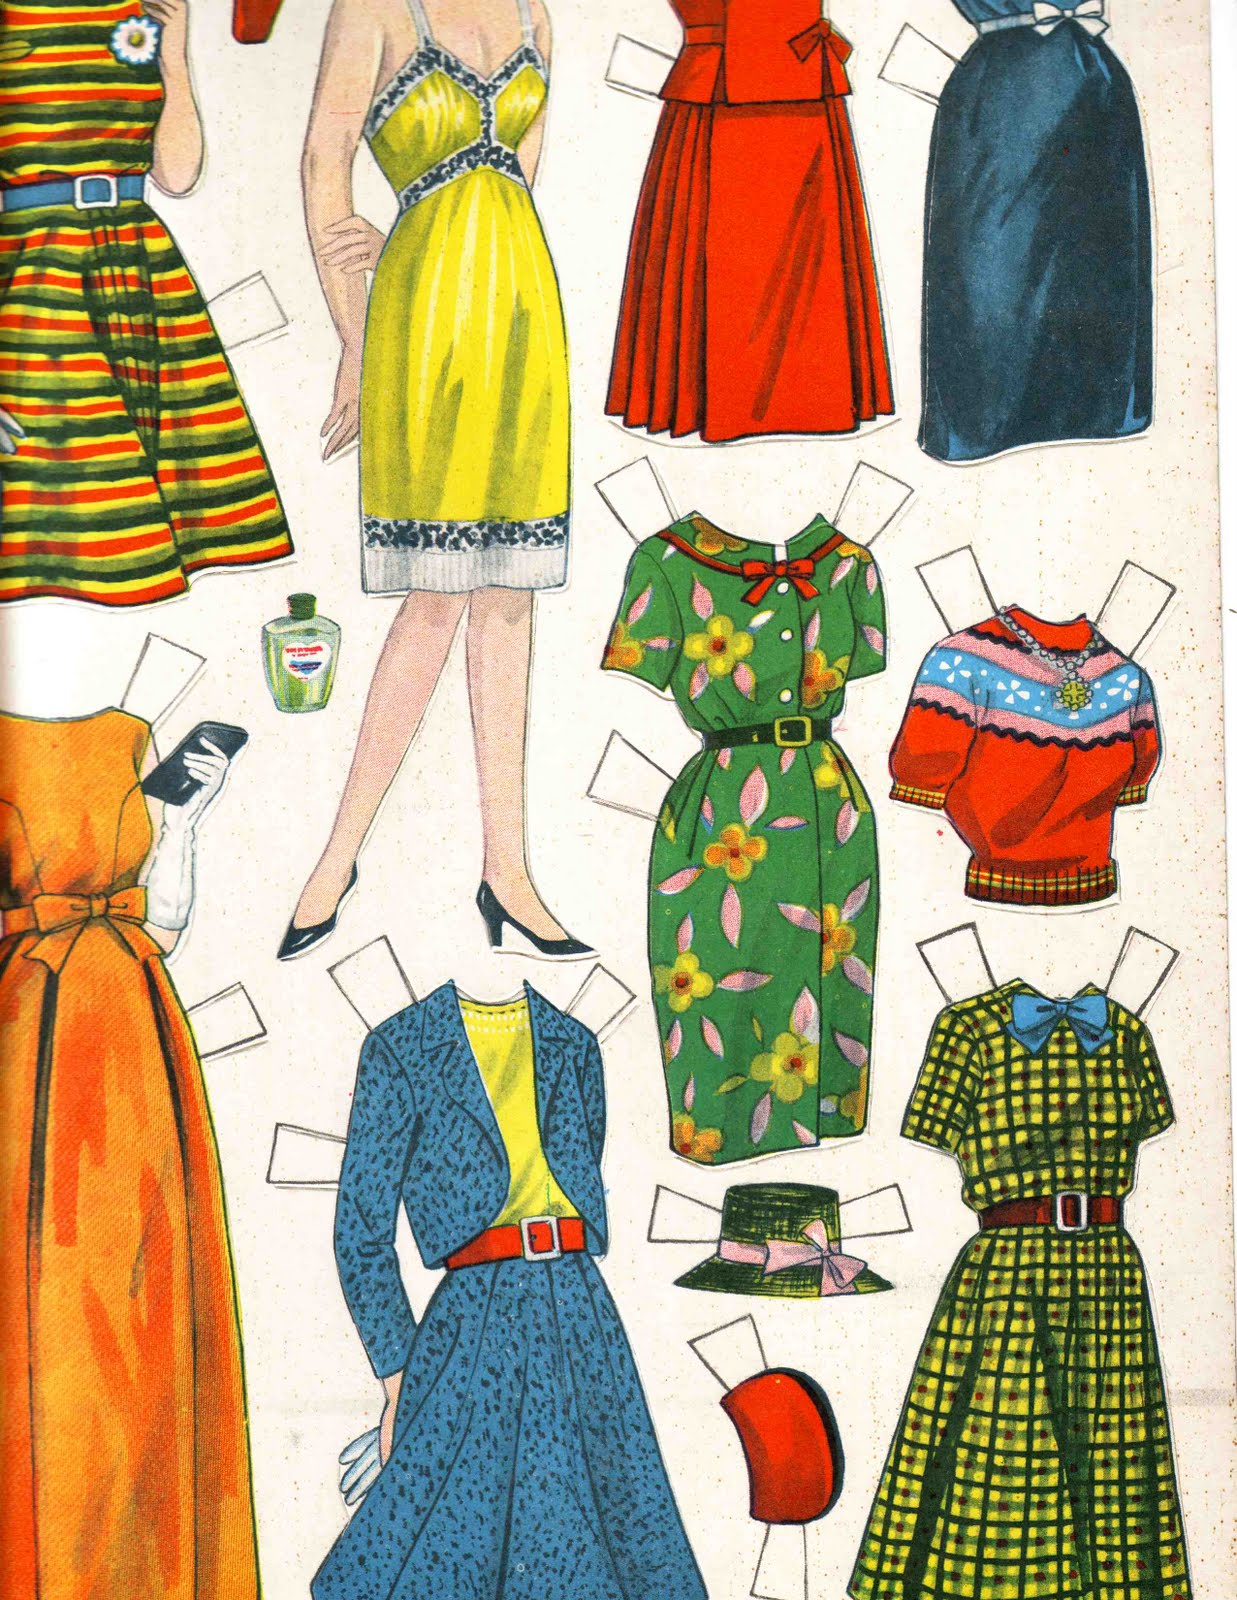 The Washerwoman: Vintage cut out dolls.